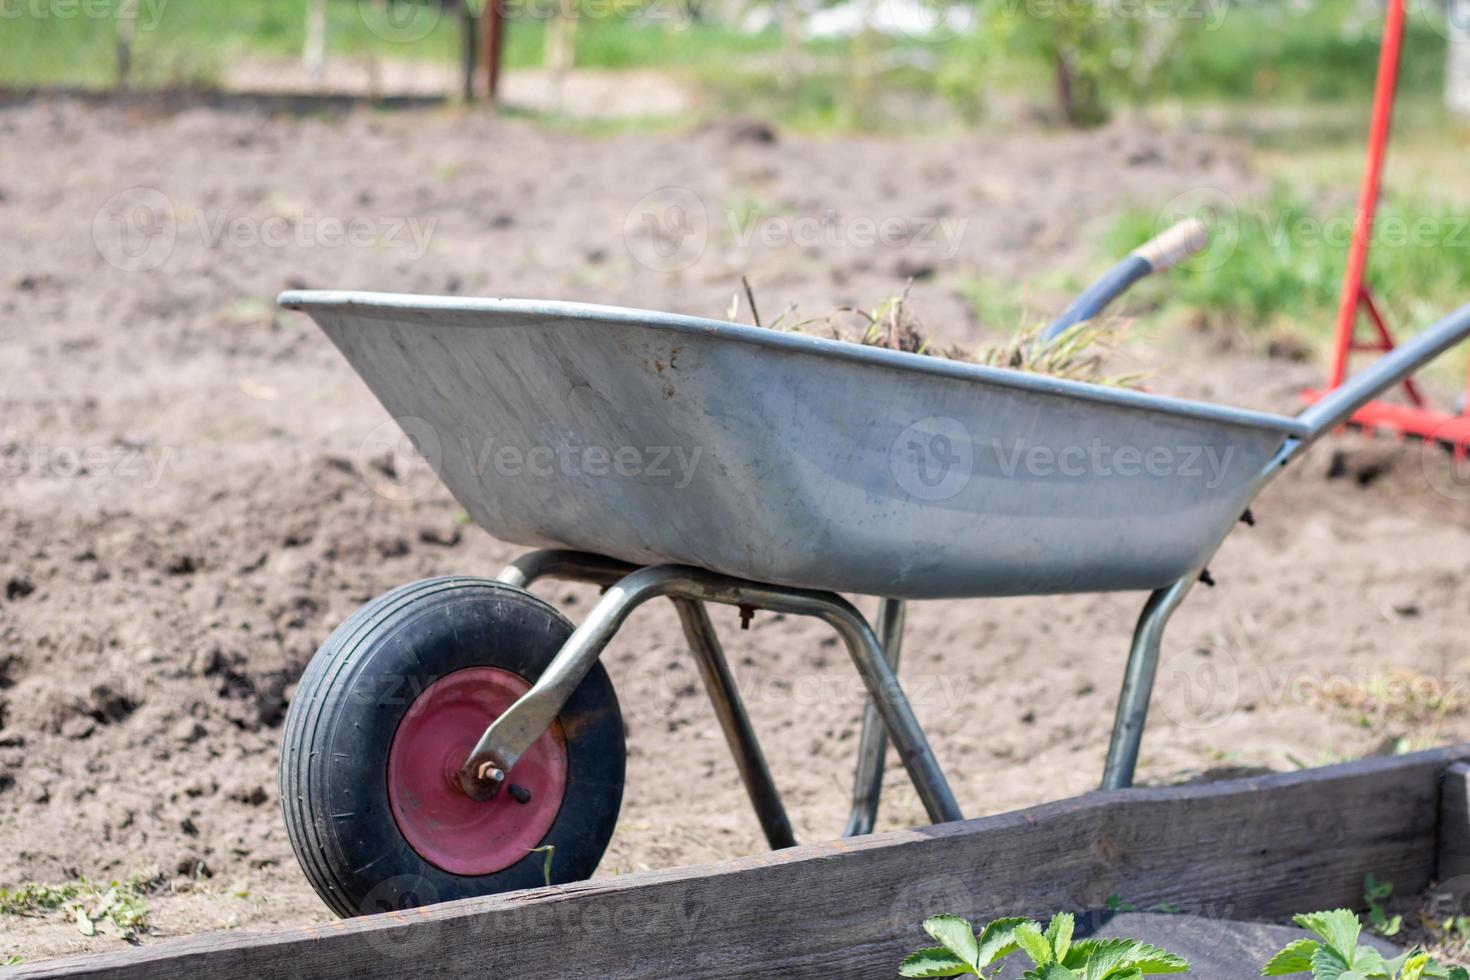 Garden wheelbarrow filled with earth or compost at the farm. Seasonal garden cleaning before autumn. On the street. Garden metal unicycle wheelbarrow full of weeds and branches. photo